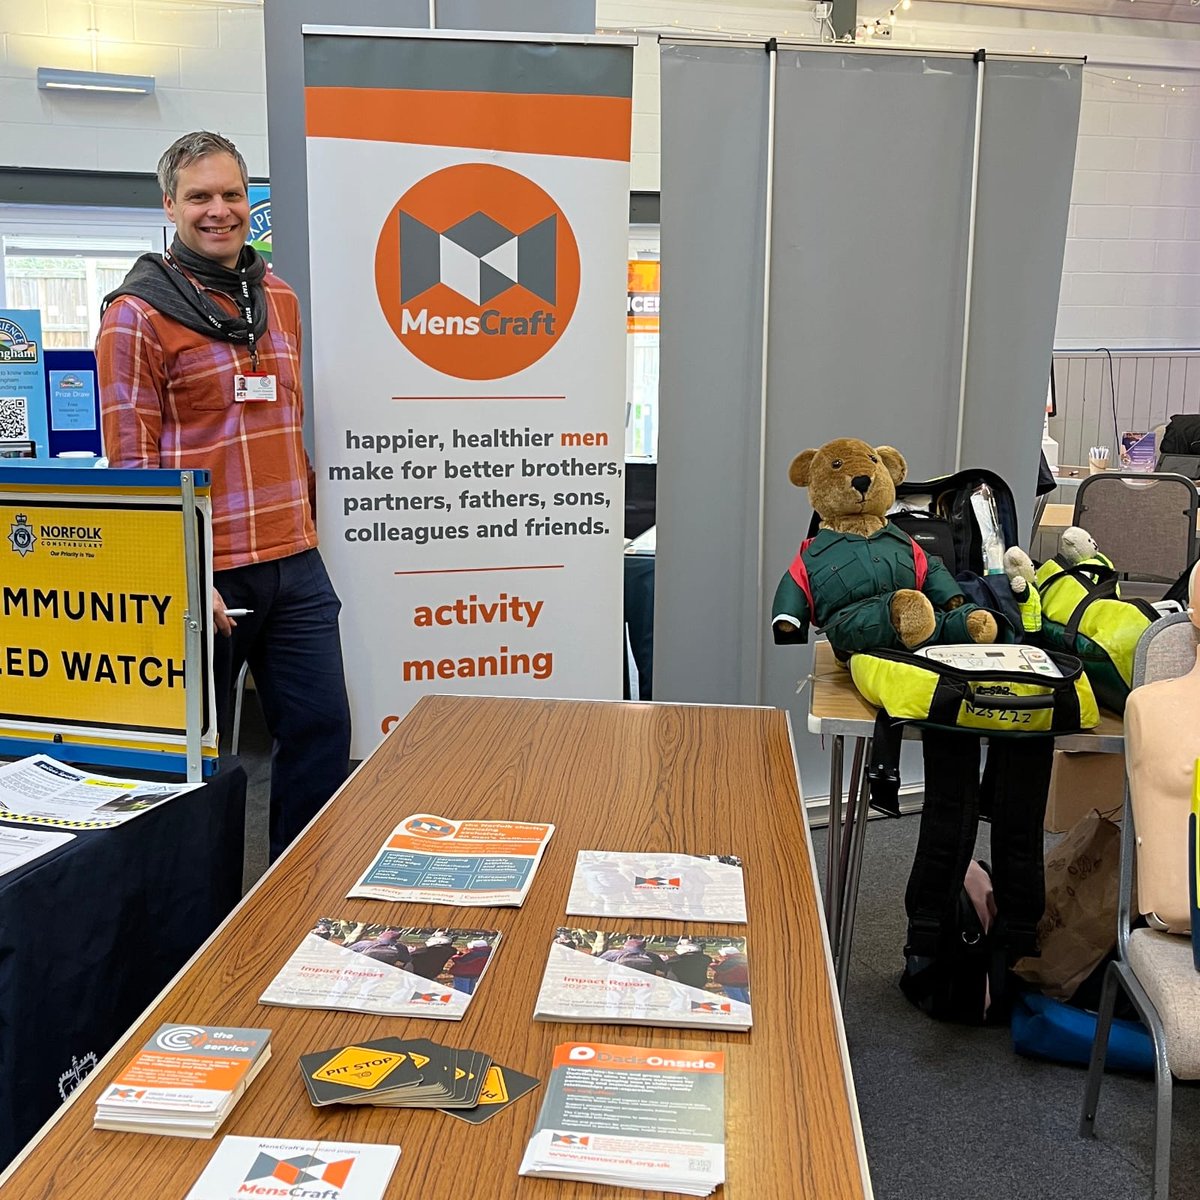 Last week, Julian & Makani represented us at the Costessey Centre for a children's services networking event. Over the weekend, Adam was at the #HealthierSheringham community fair & fun day. Good to be out making connections, promoting our services & discussing partnerships.